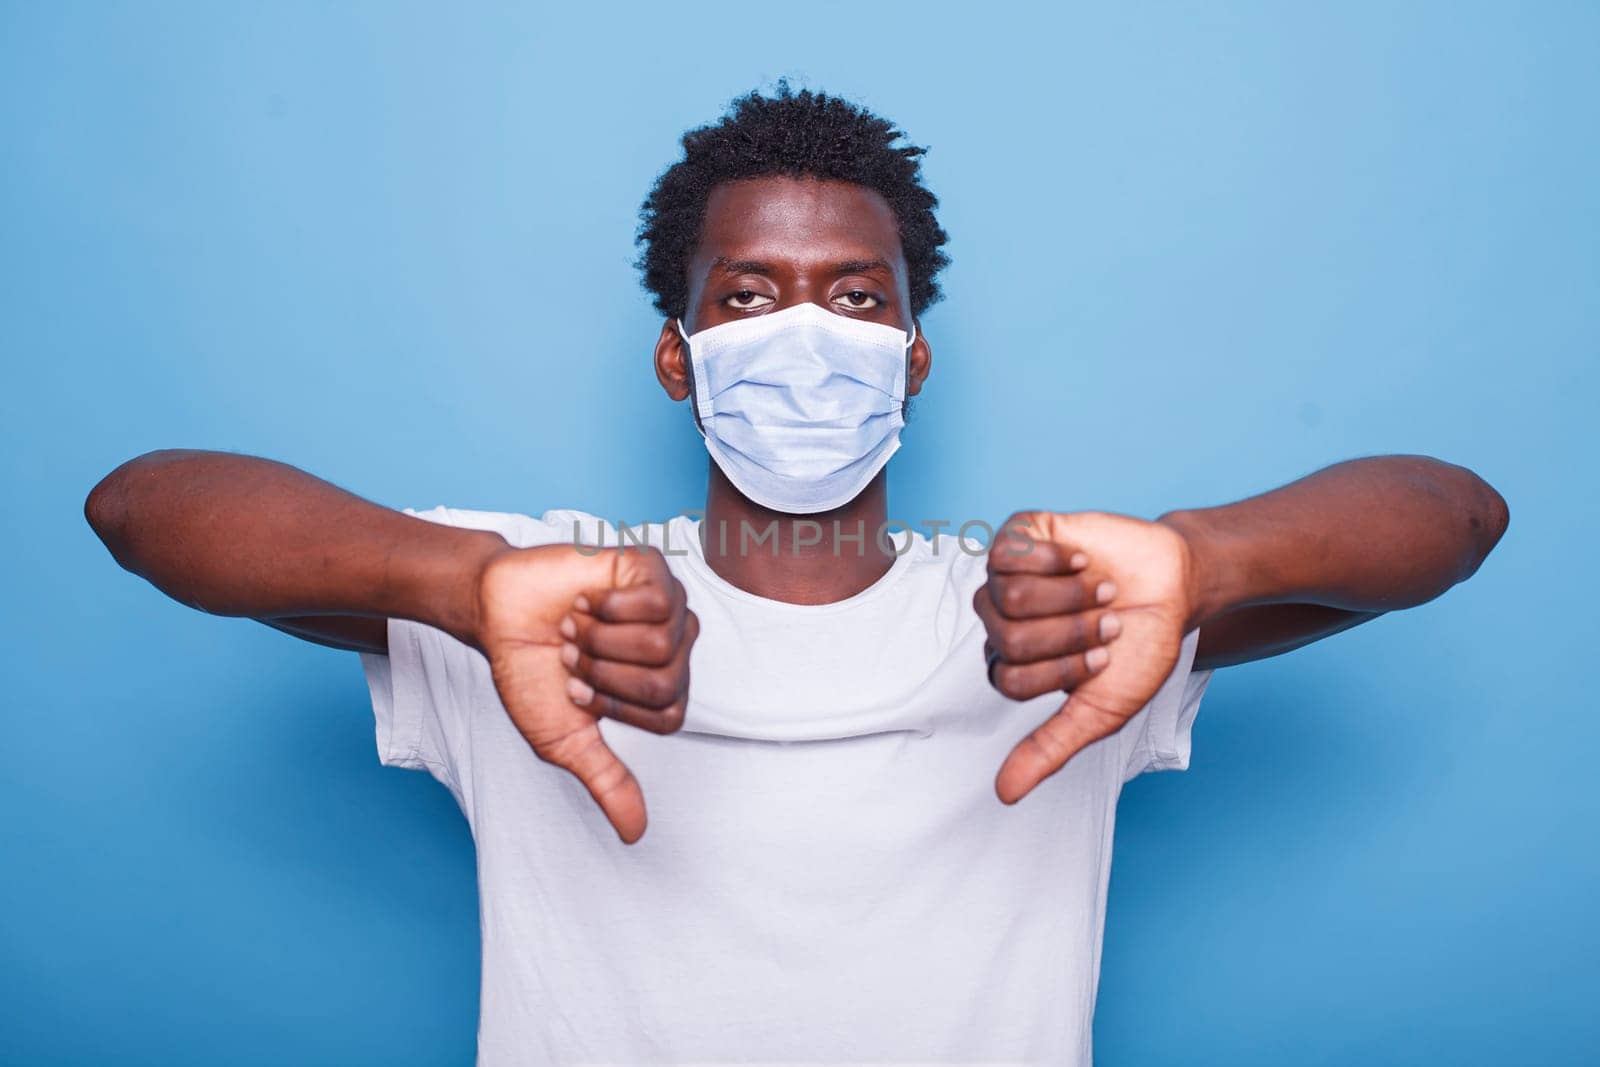 African American adult showing thumbs down sign with both hands. Black man gesturing with his fingers while looking at camera and wearing face mask to protect from coronavirus epidemic.